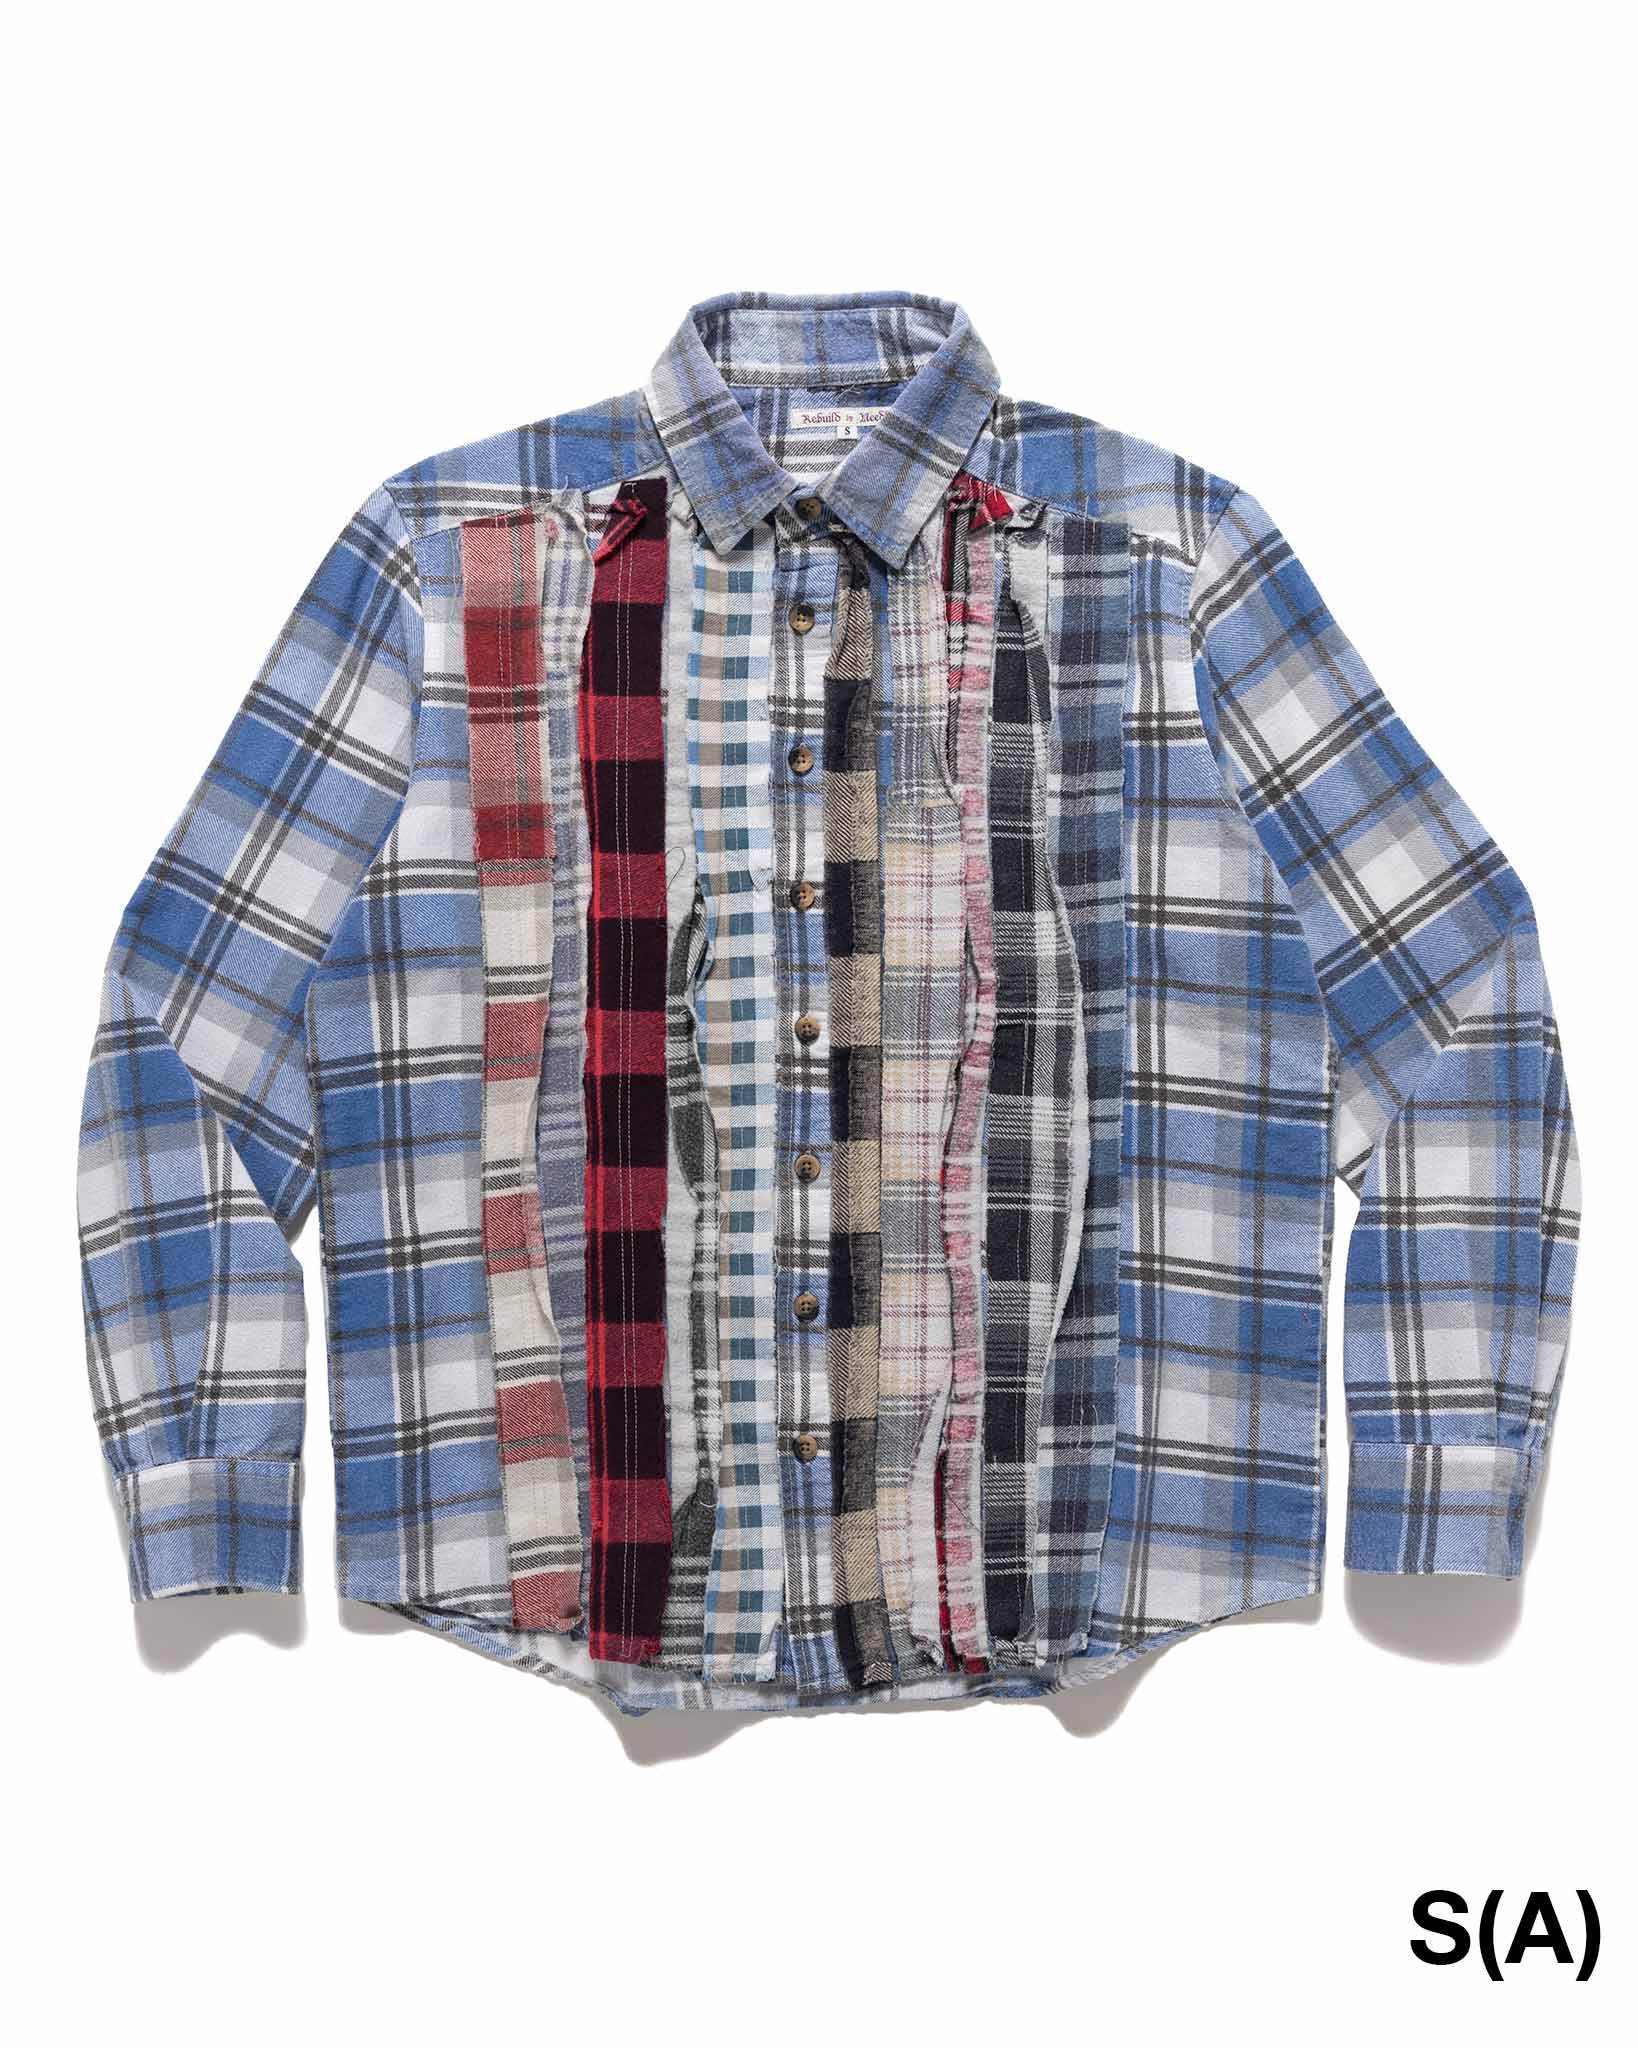 Rebuild by Needles Flannel Shirt -> Ribbon Shirt Assorted - 6